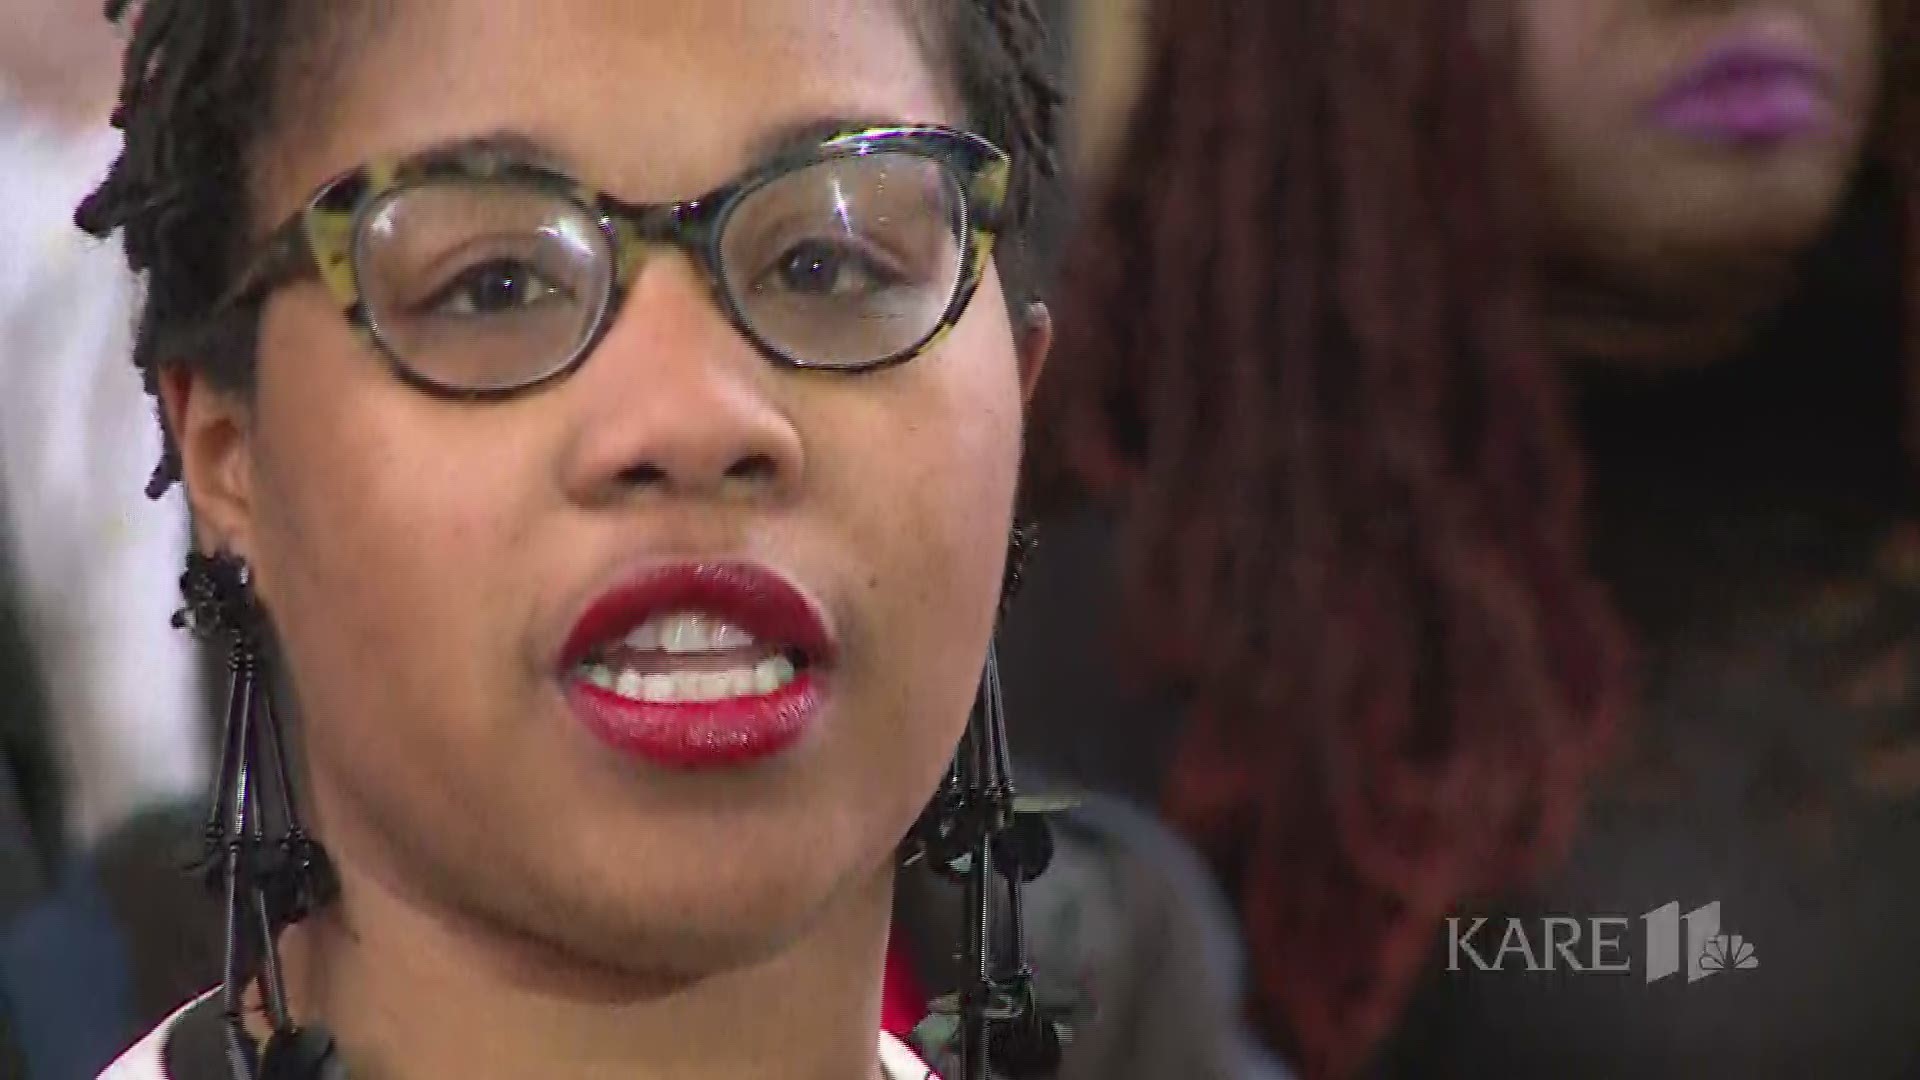 President of the Minneapolis NAACP Leslie Redmond says Klobuchar has "questions that need to be answered" after an Associated Press investigation into Myon Burrell.